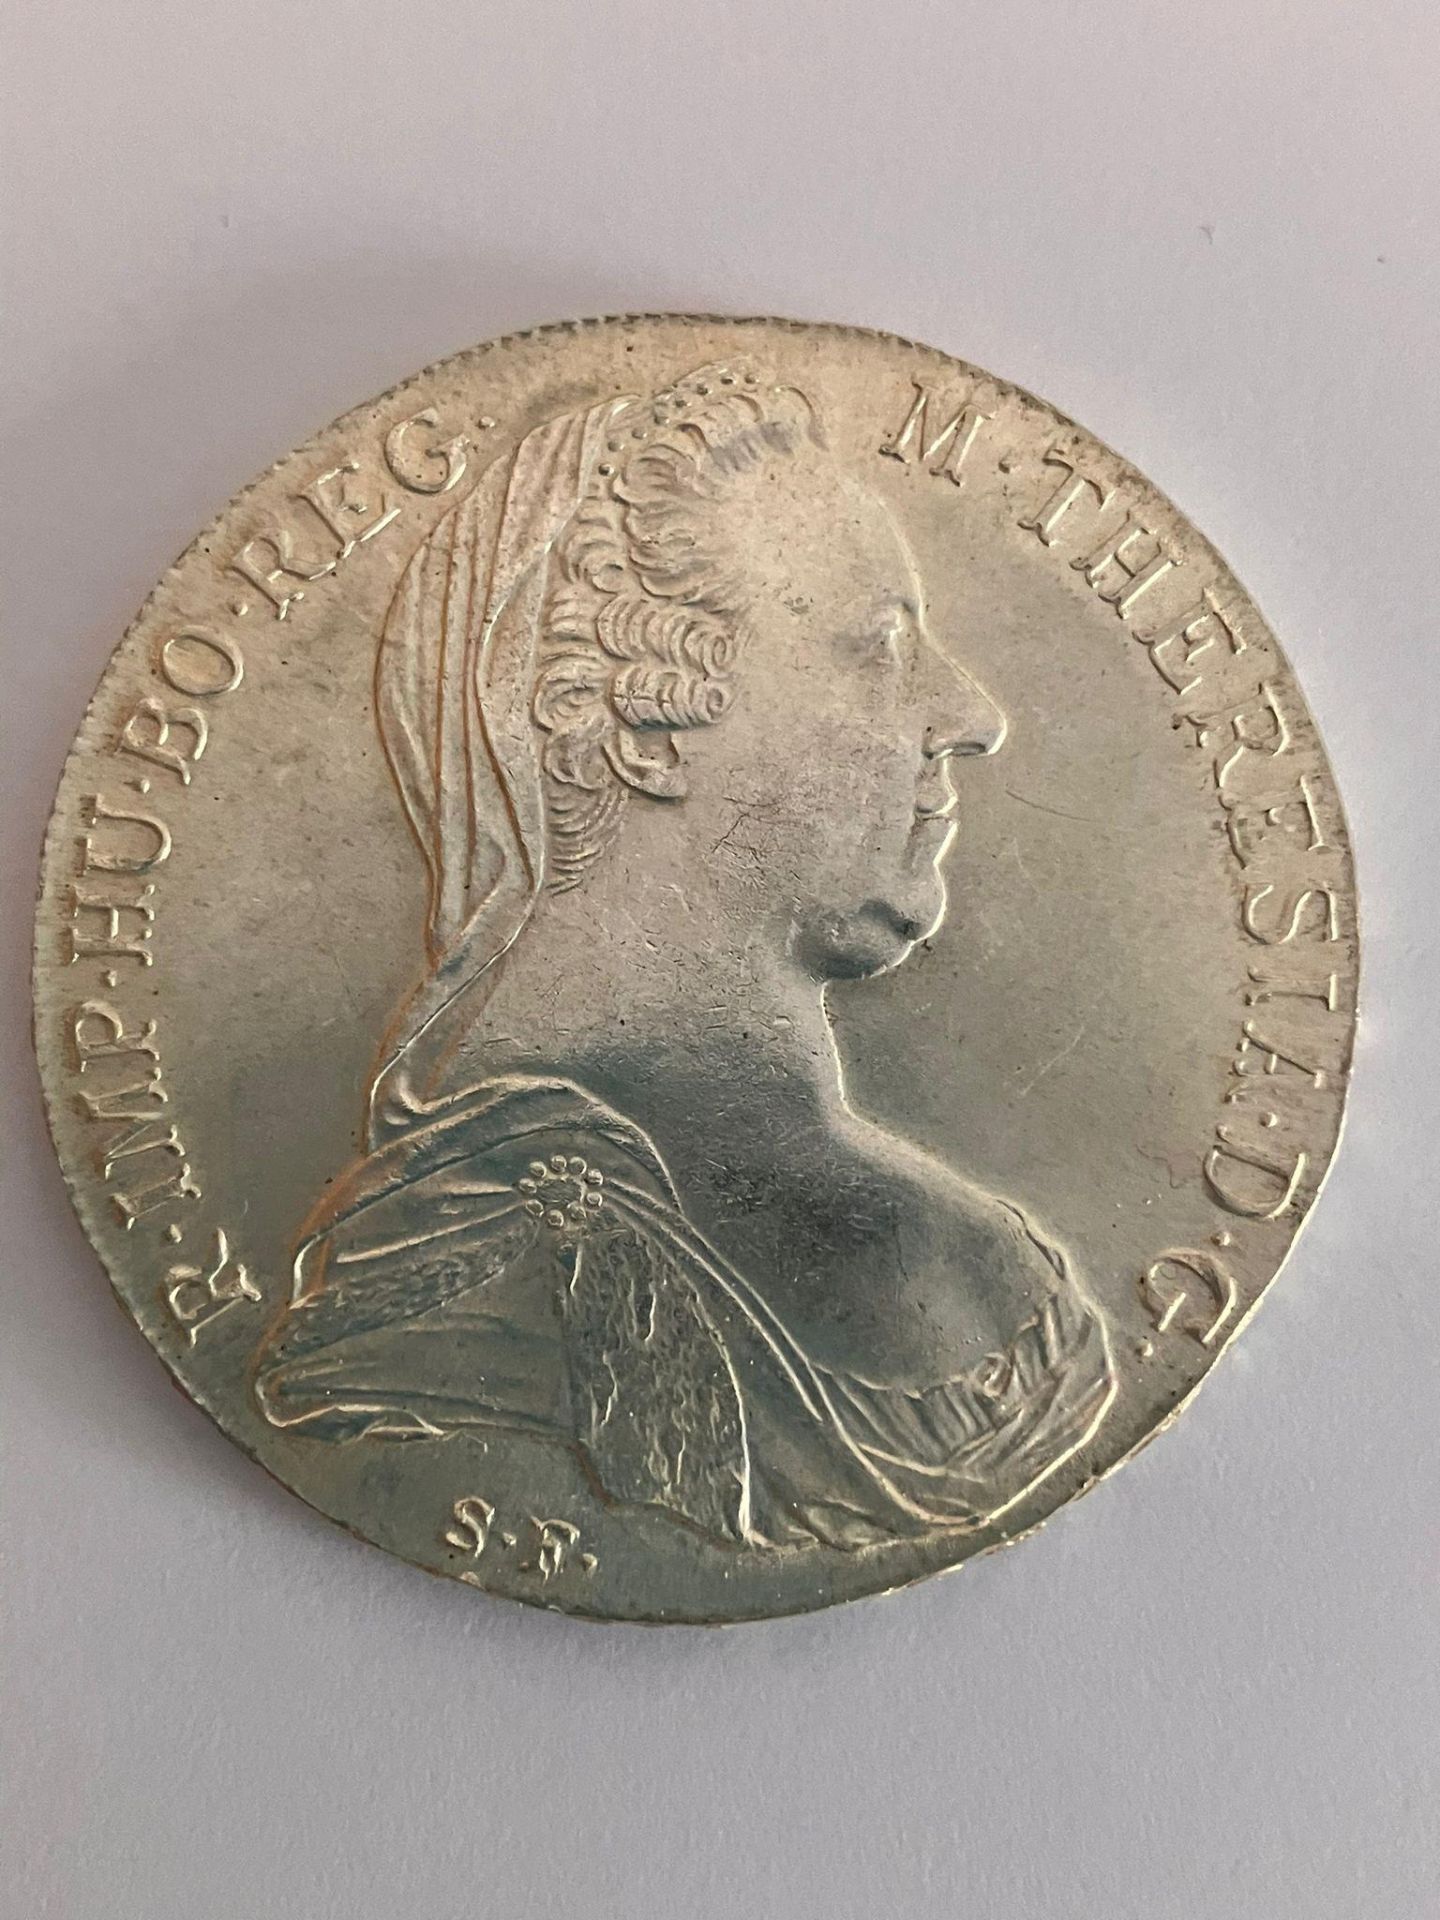 Vintage SILVER MARIE THERESA THALER COIN.1780. Conditioning as new and uncirculated. Extremely - Bild 3 aus 3